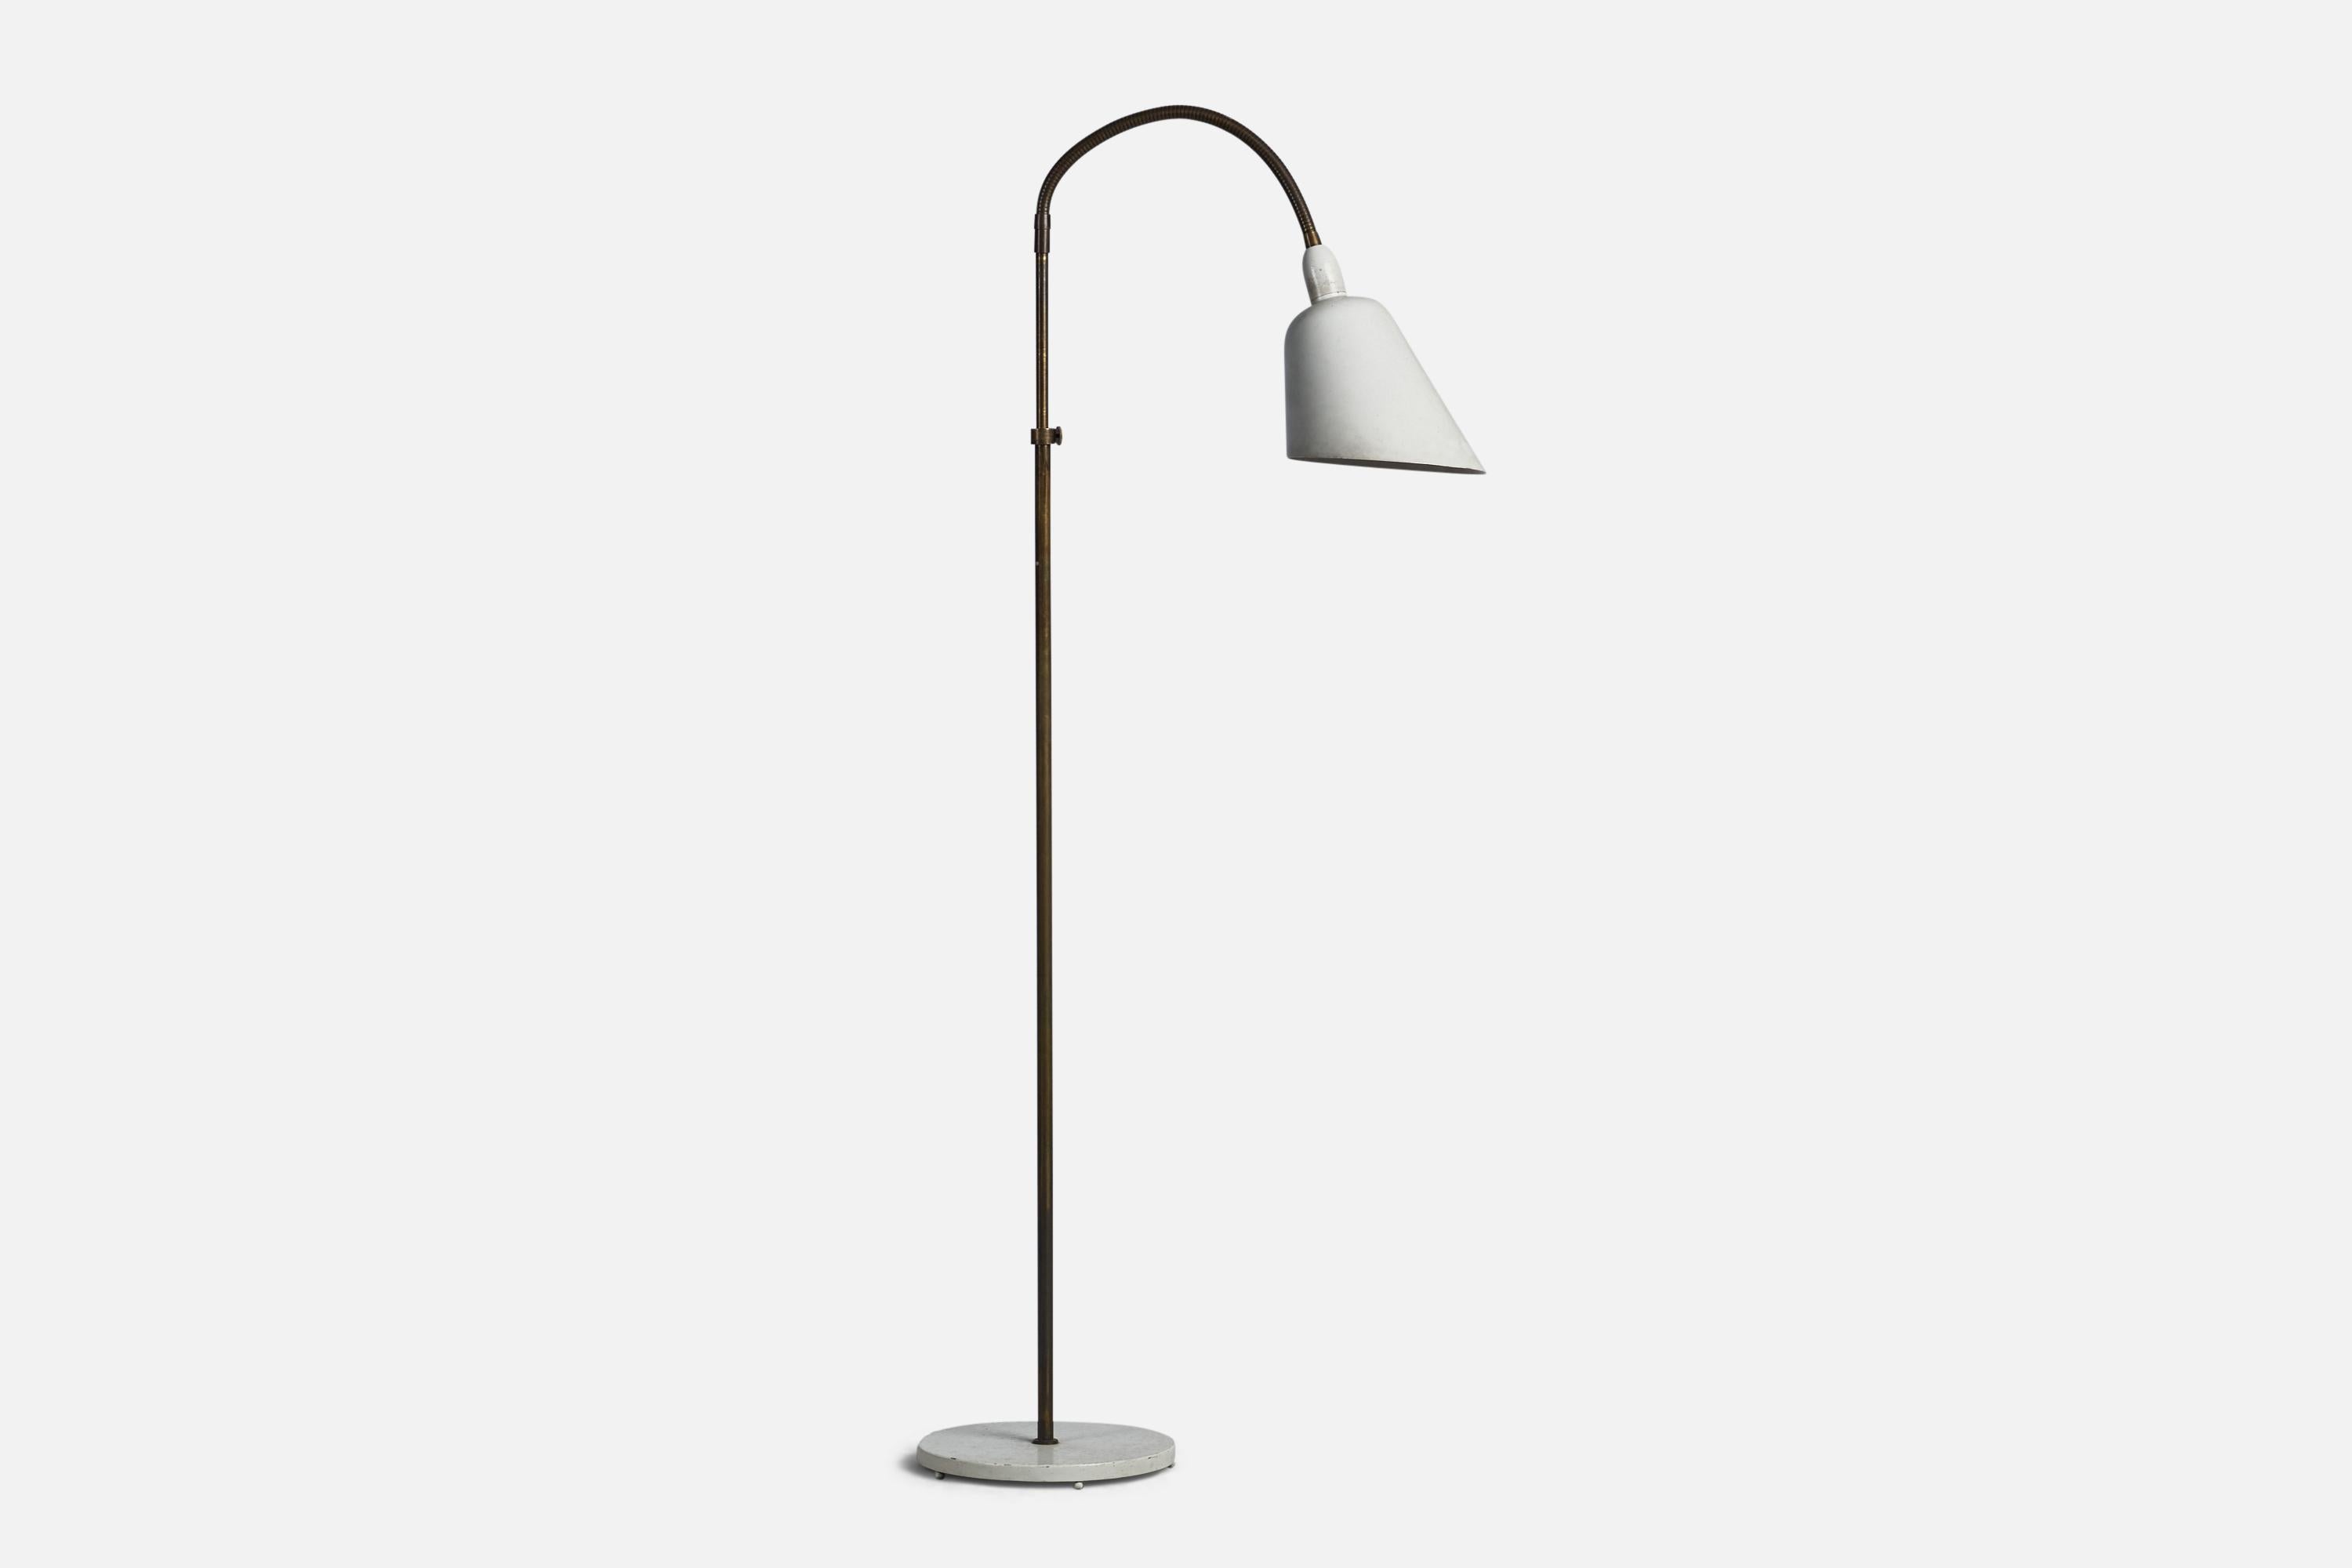 An adjustable brass and white-lacquered metal floor lamp designed by Arne Jacobsen and produced by Louis Poulsen, Denmark, c. 1930s.
Overall Dimensions (inches): 52.75” H x 7” W x 23” D

Bulb Specifications: E-14 Bulb
Number of Sockets: 1
All